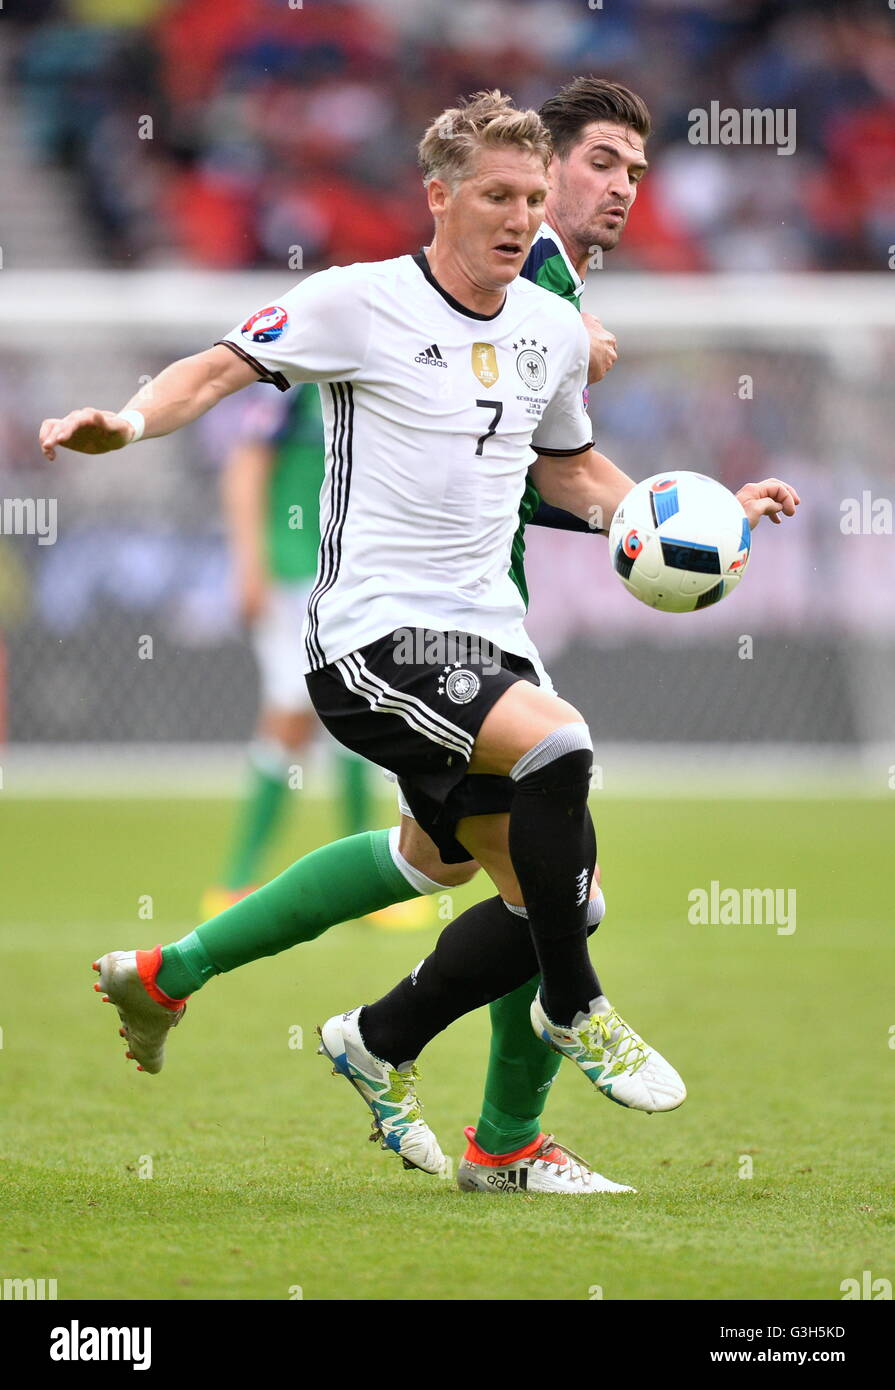 21.06.2016. Paris, France. UEFA Euro 2016 Group C match between Northern Ireland and Germany at the Parc des Princes stadium in Paris, France, 21 June 2016.  Bastian Schweinsteiger (ger) Stock Photo